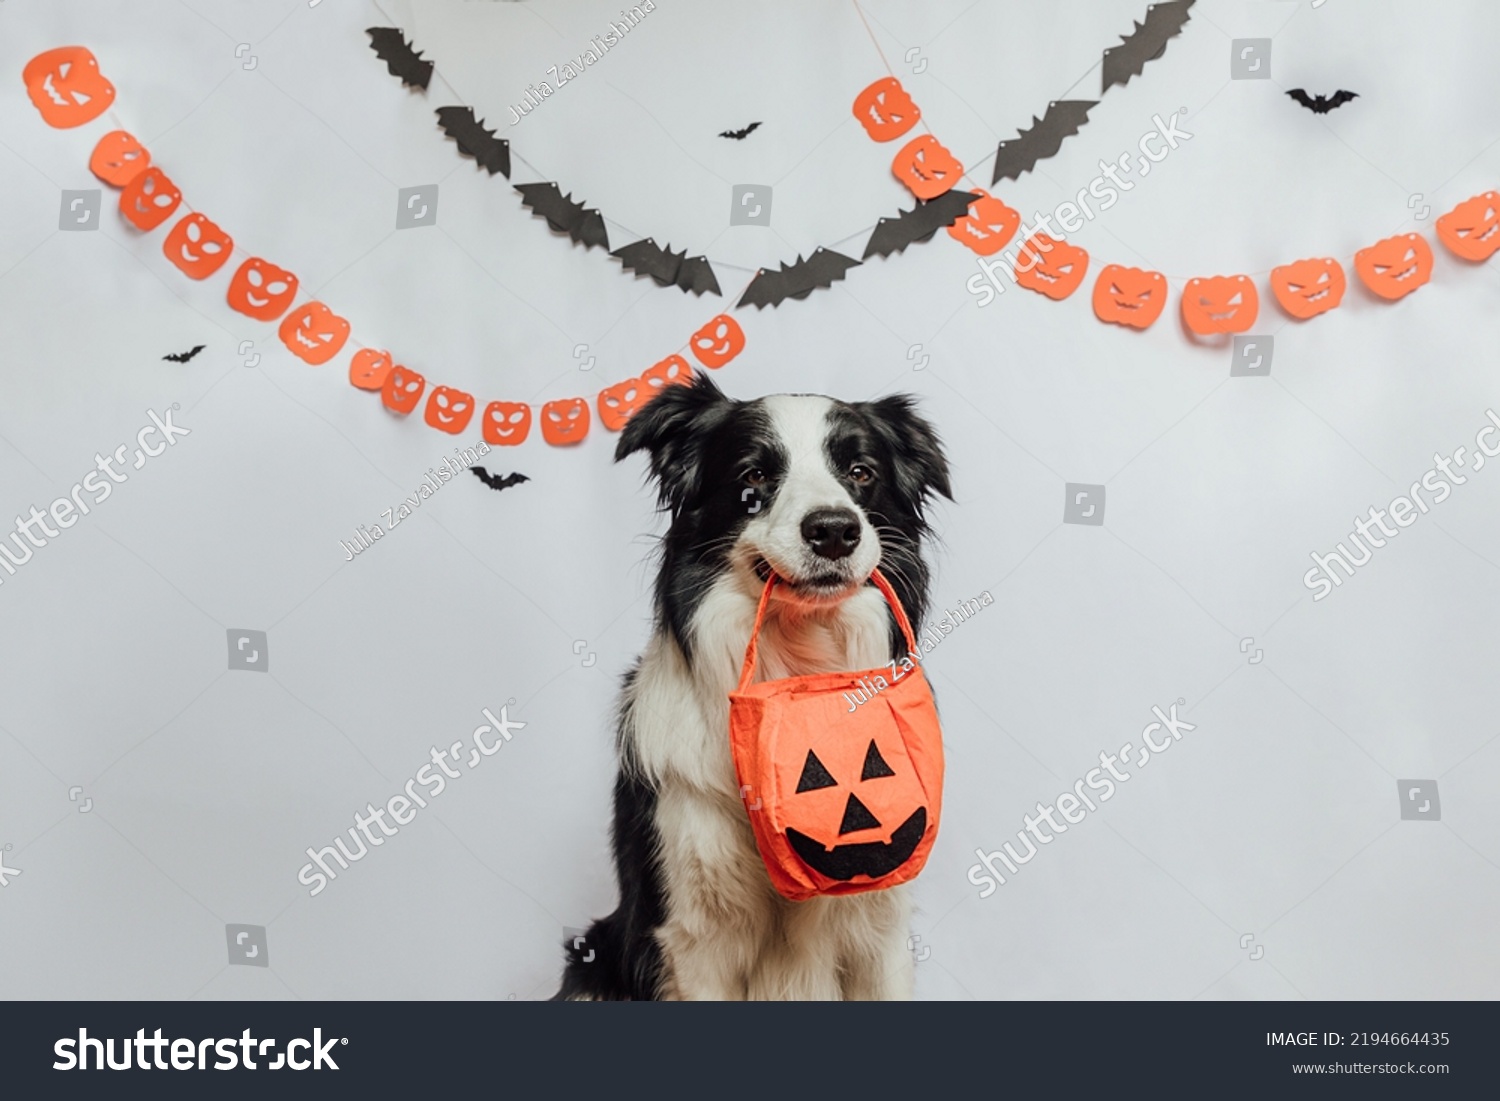 Trick or Treat concept. Funny puppy dog border collie holding jack o lantern pumpkin basket for candy in mouth on white background with halloween garland decorations. Preparation for Halloween party #2194664435